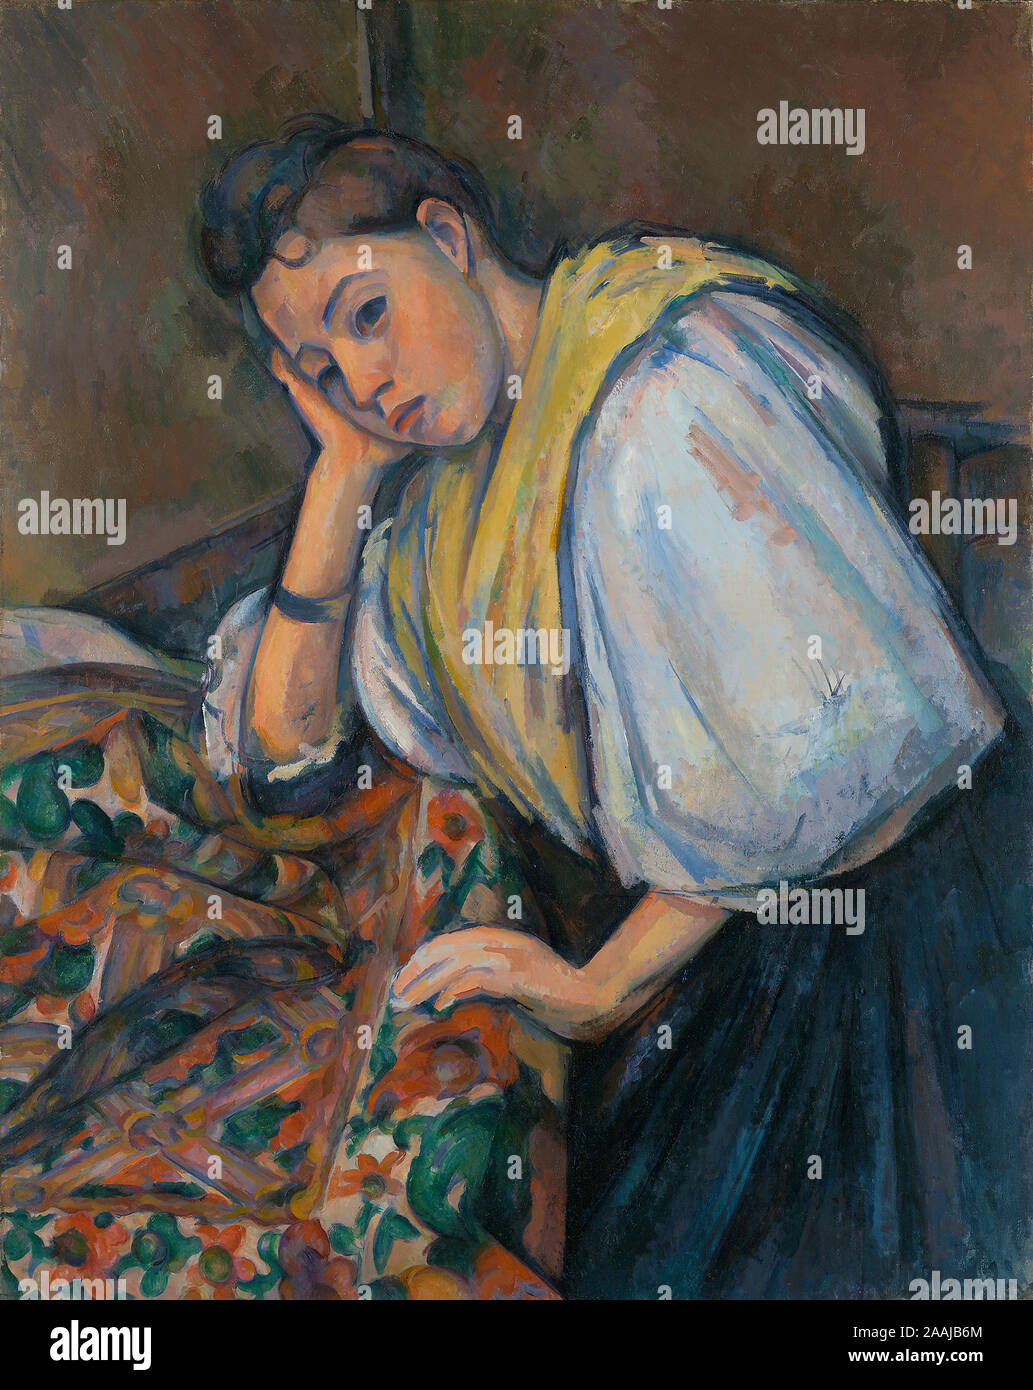 Young Italian Woman at a Table; Paul Cézanne (French, 1839 - 1906); about 1895–1900; Oil on canvas; 92.1 × 73.5 cm (36 1/4 × 28 15/16 in.) Stock Photo